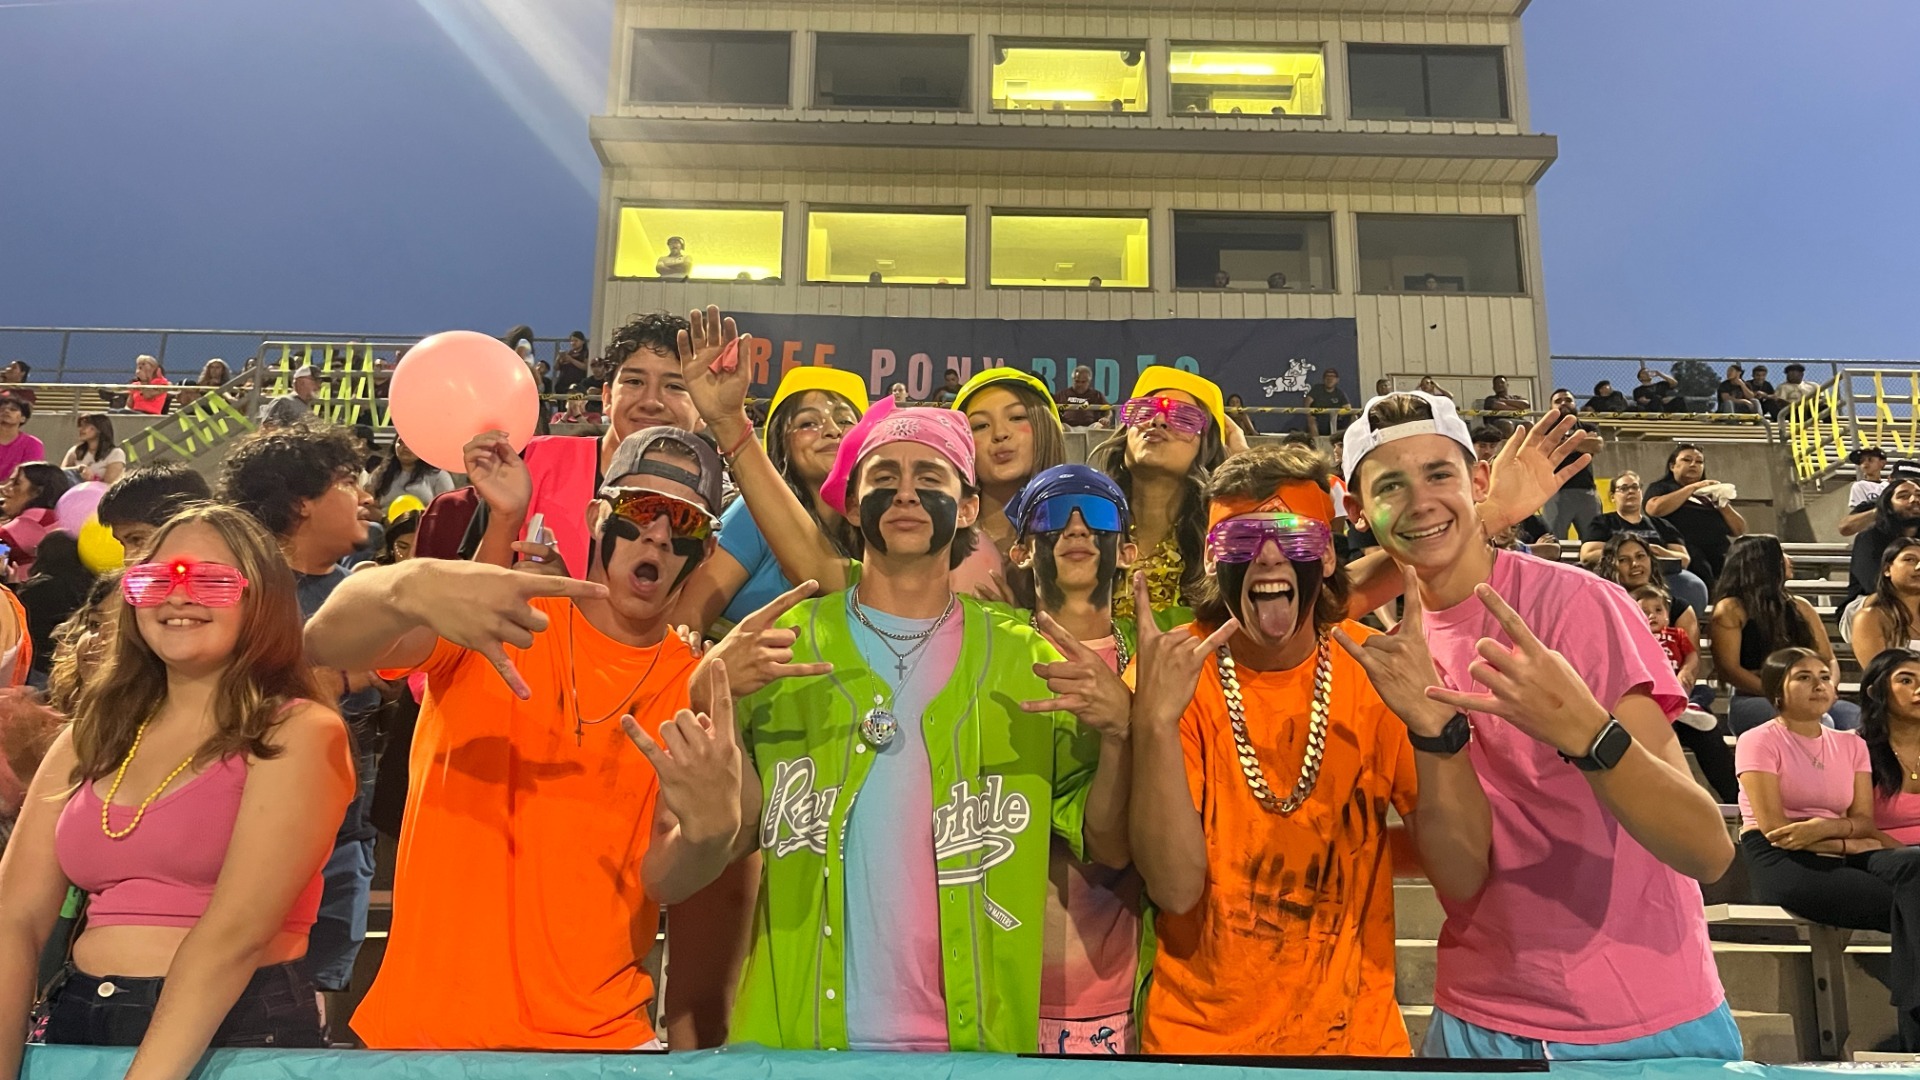 Slide 0 - Pioneer Platoon came out to support football on NEON NIGHT! 